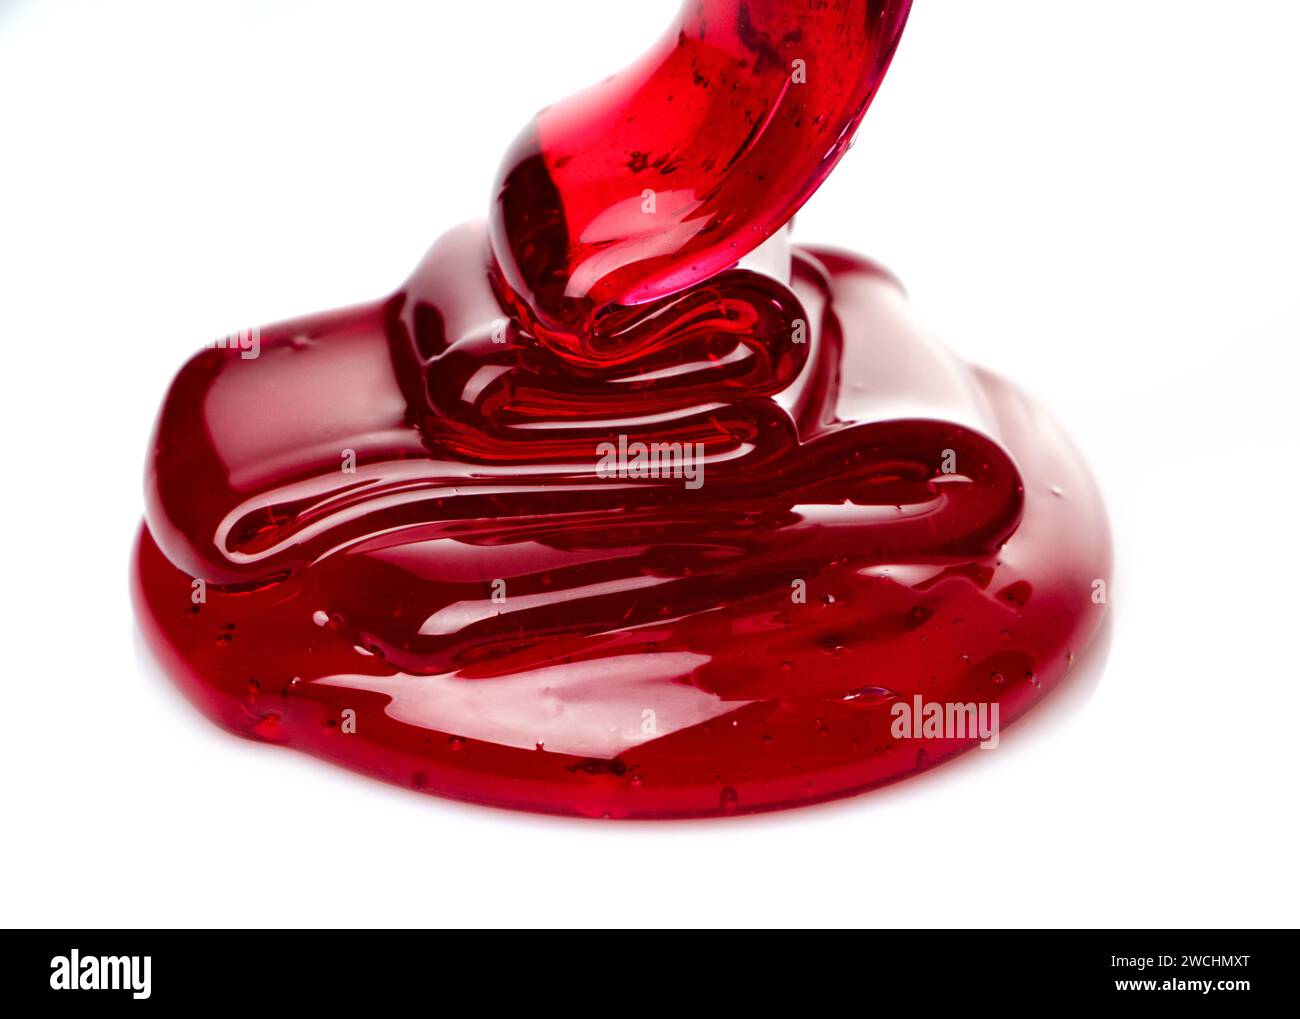 Red paste for sugaring. The concept of removing excess body hair. Stock Photo